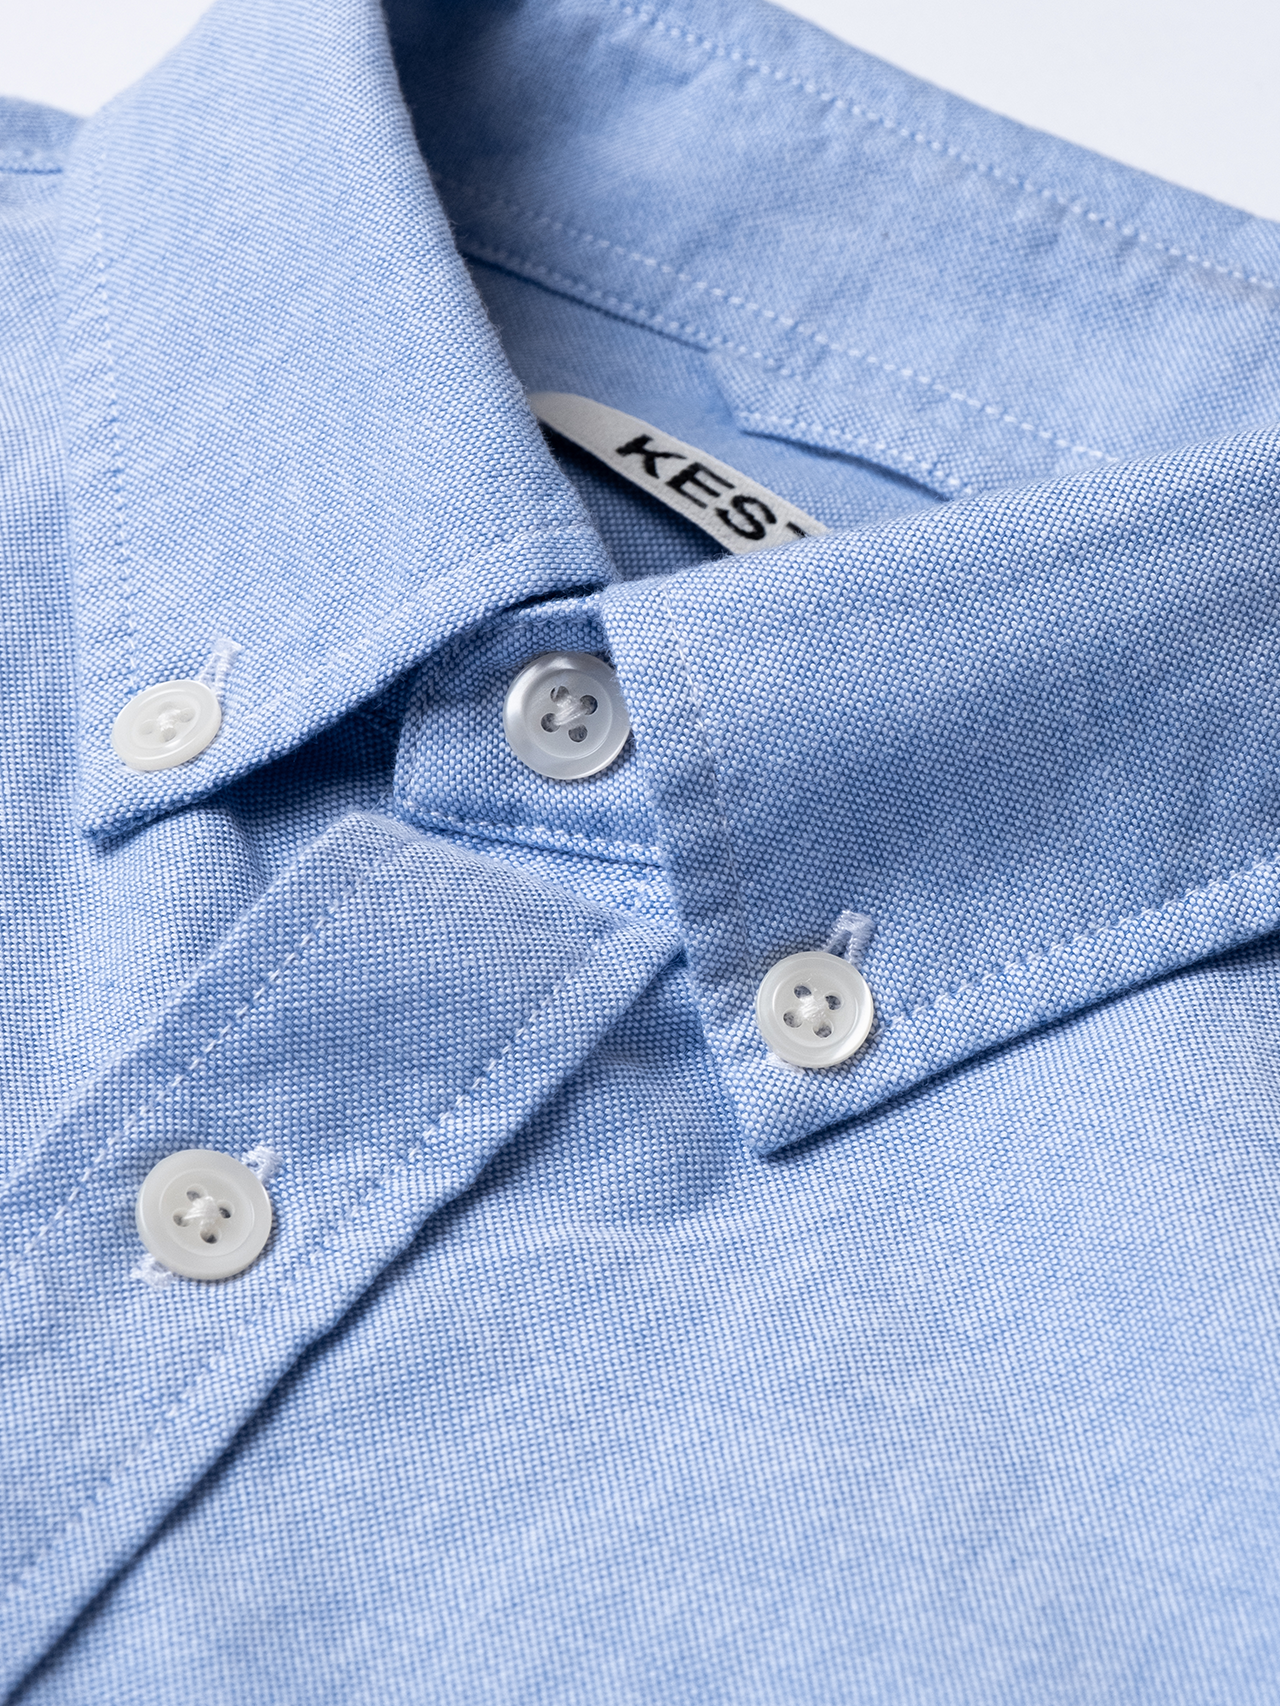 The buttoned collar of a classic men's Oxford Shirt, designed by premium menswear brand KESTIN, based in Scotland.